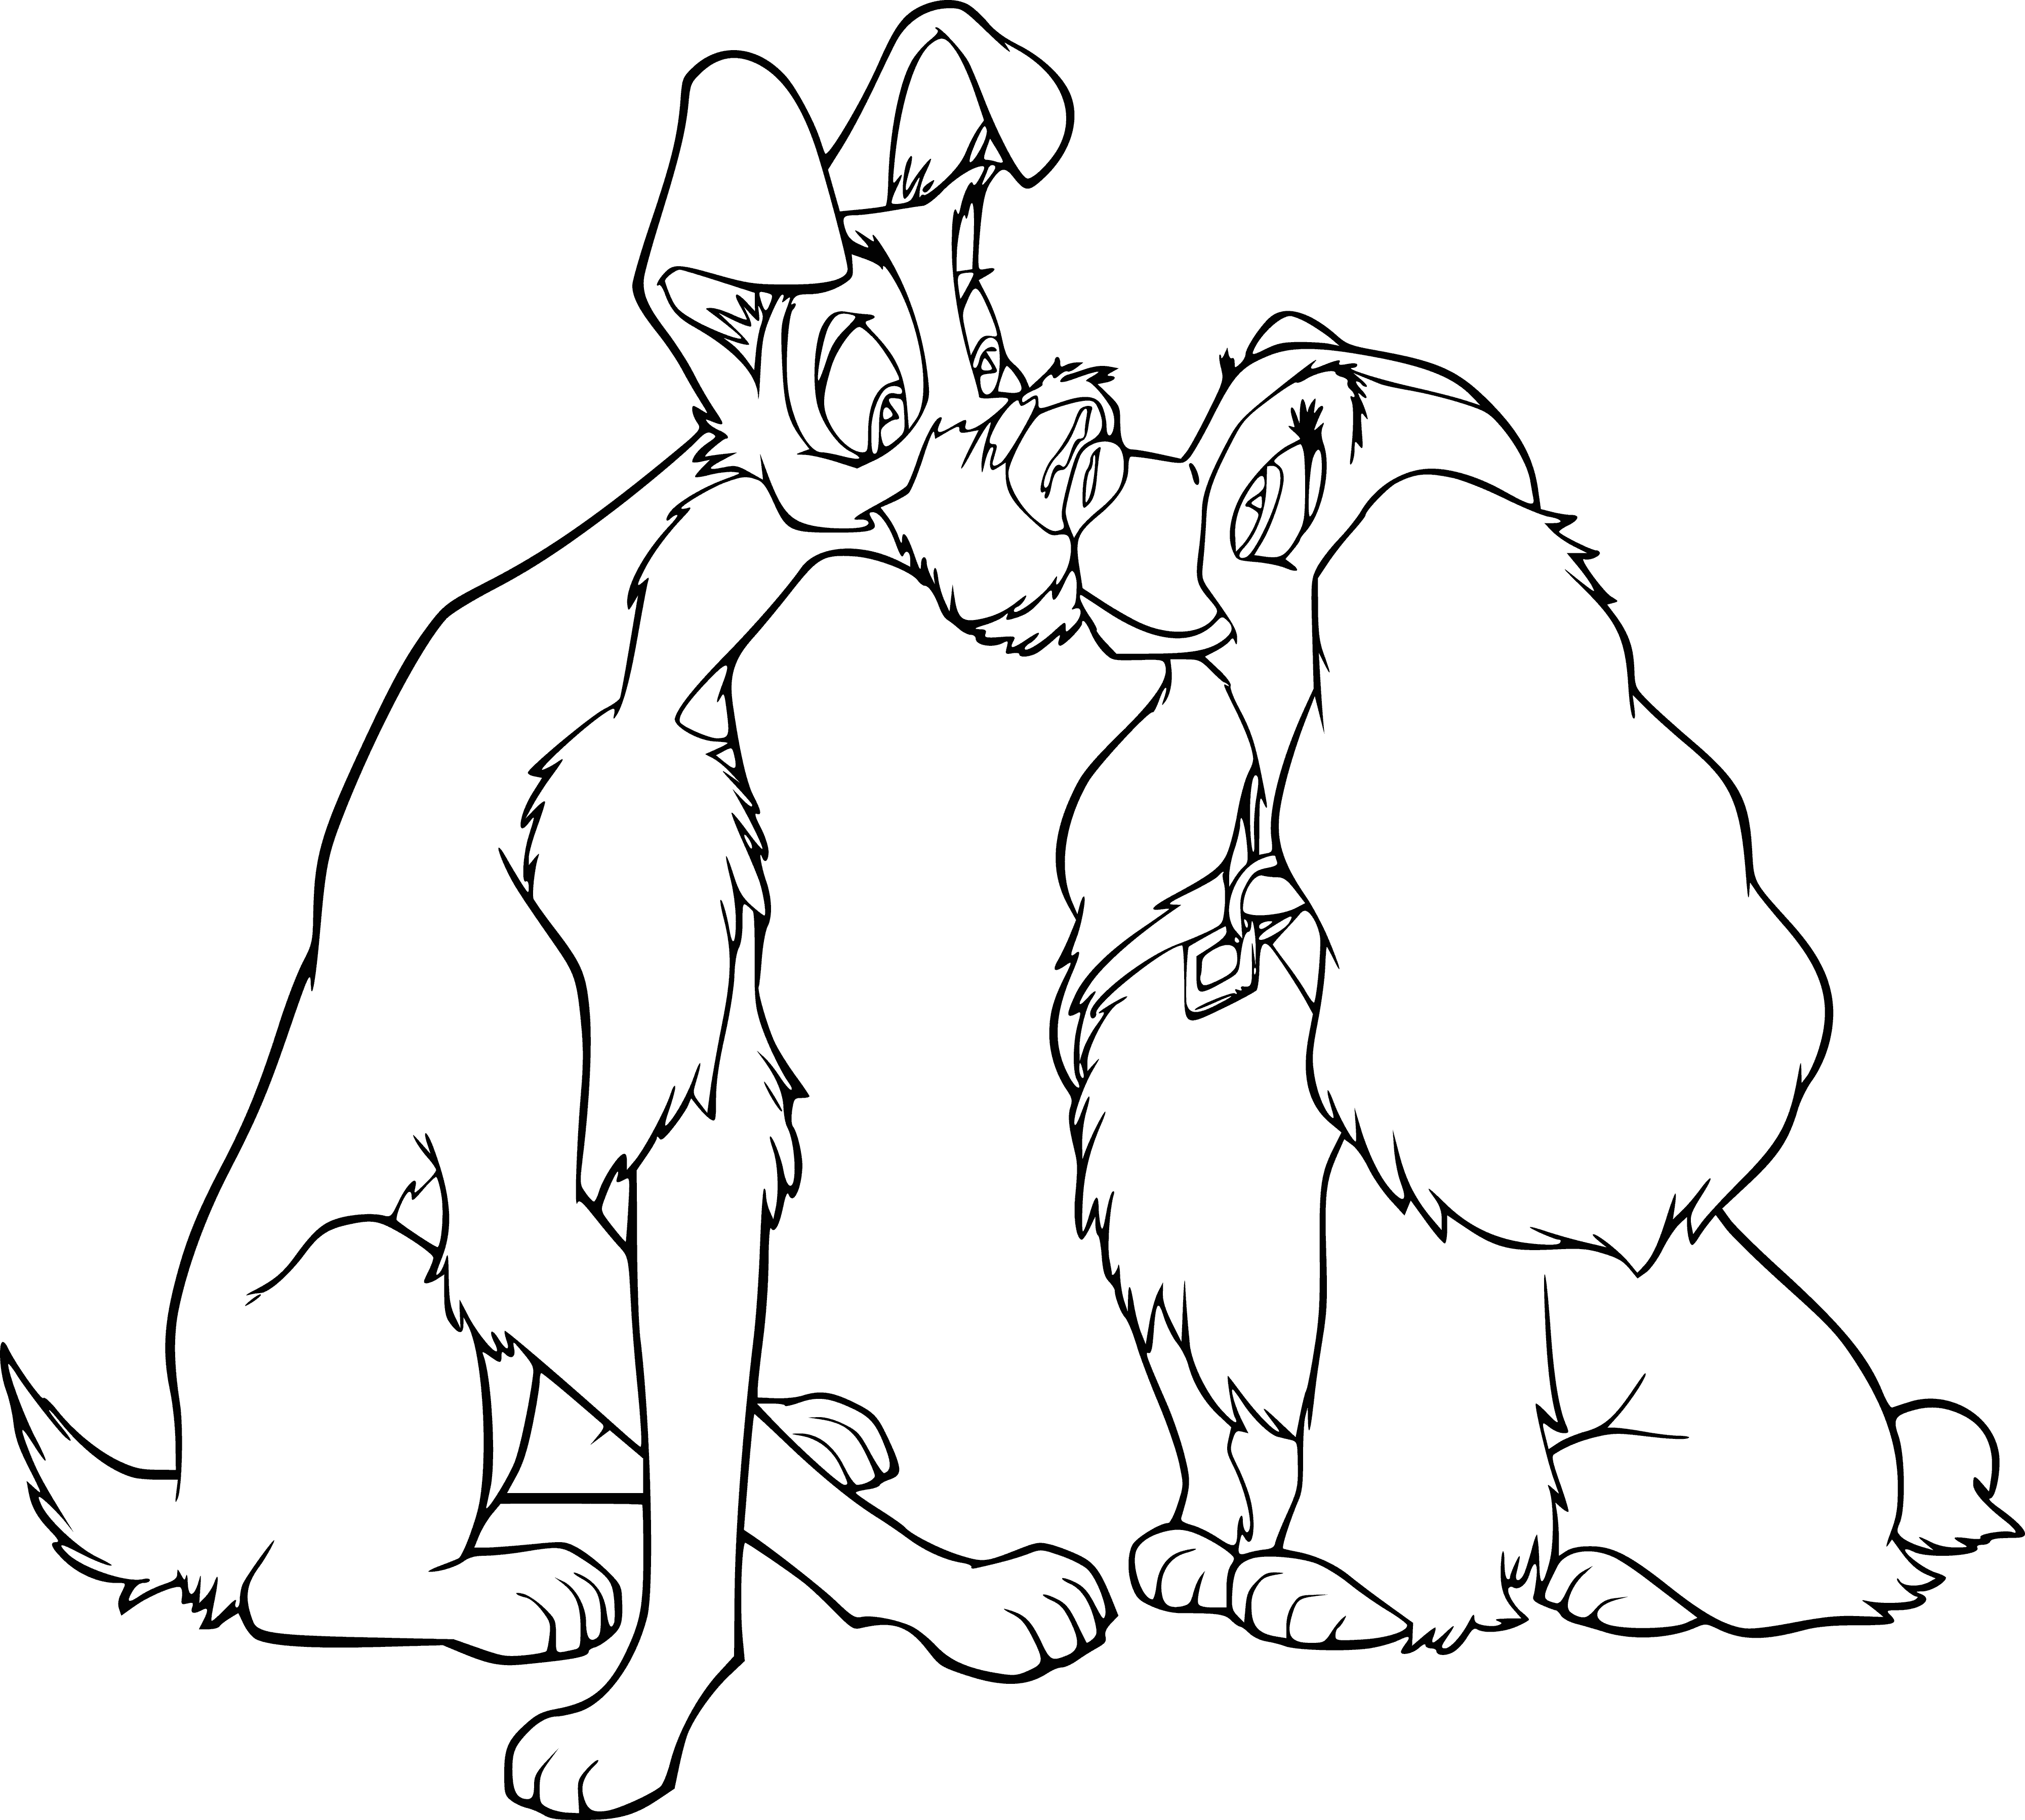 coloring page: Two dogs on a hill, almost touching, winking & tongue out – under a crescent moon.